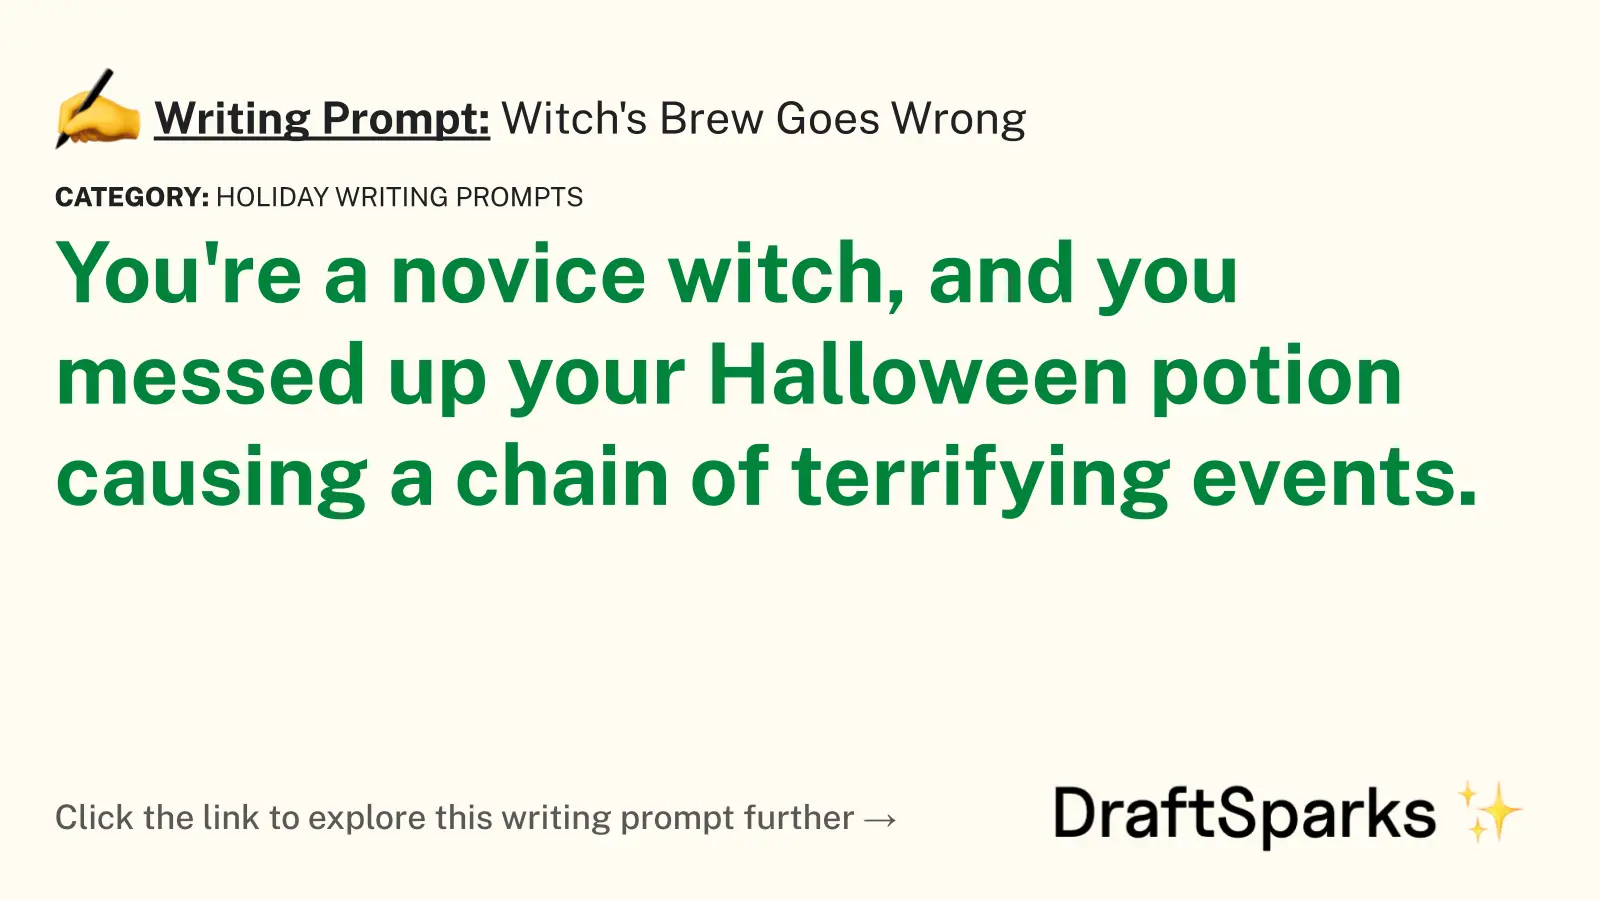 Witch’s Brew Goes Wrong